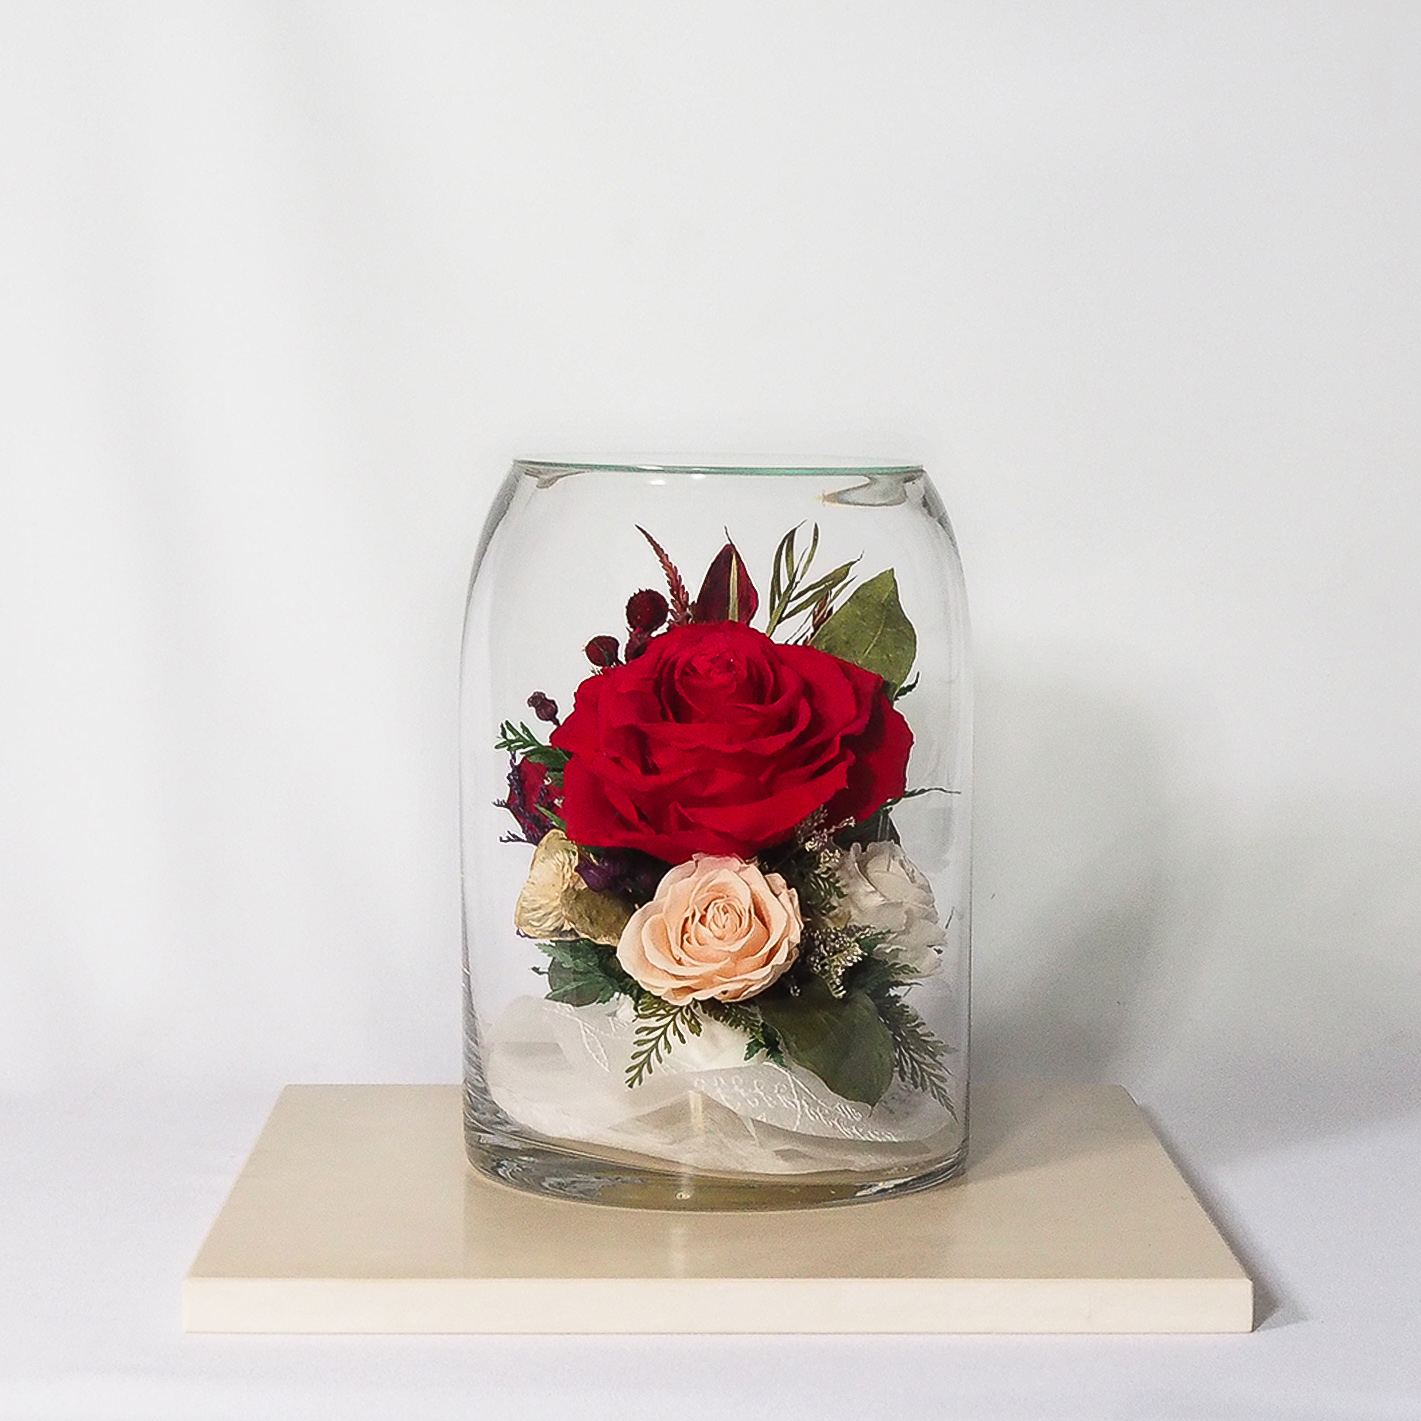 Preserved Flower Imported From Japan (Red-Ivory White-Pink Champagne)(67136). For Valentines, Gift, Home Decoration, Anniversary and present for your love ones. 100% natural flower.